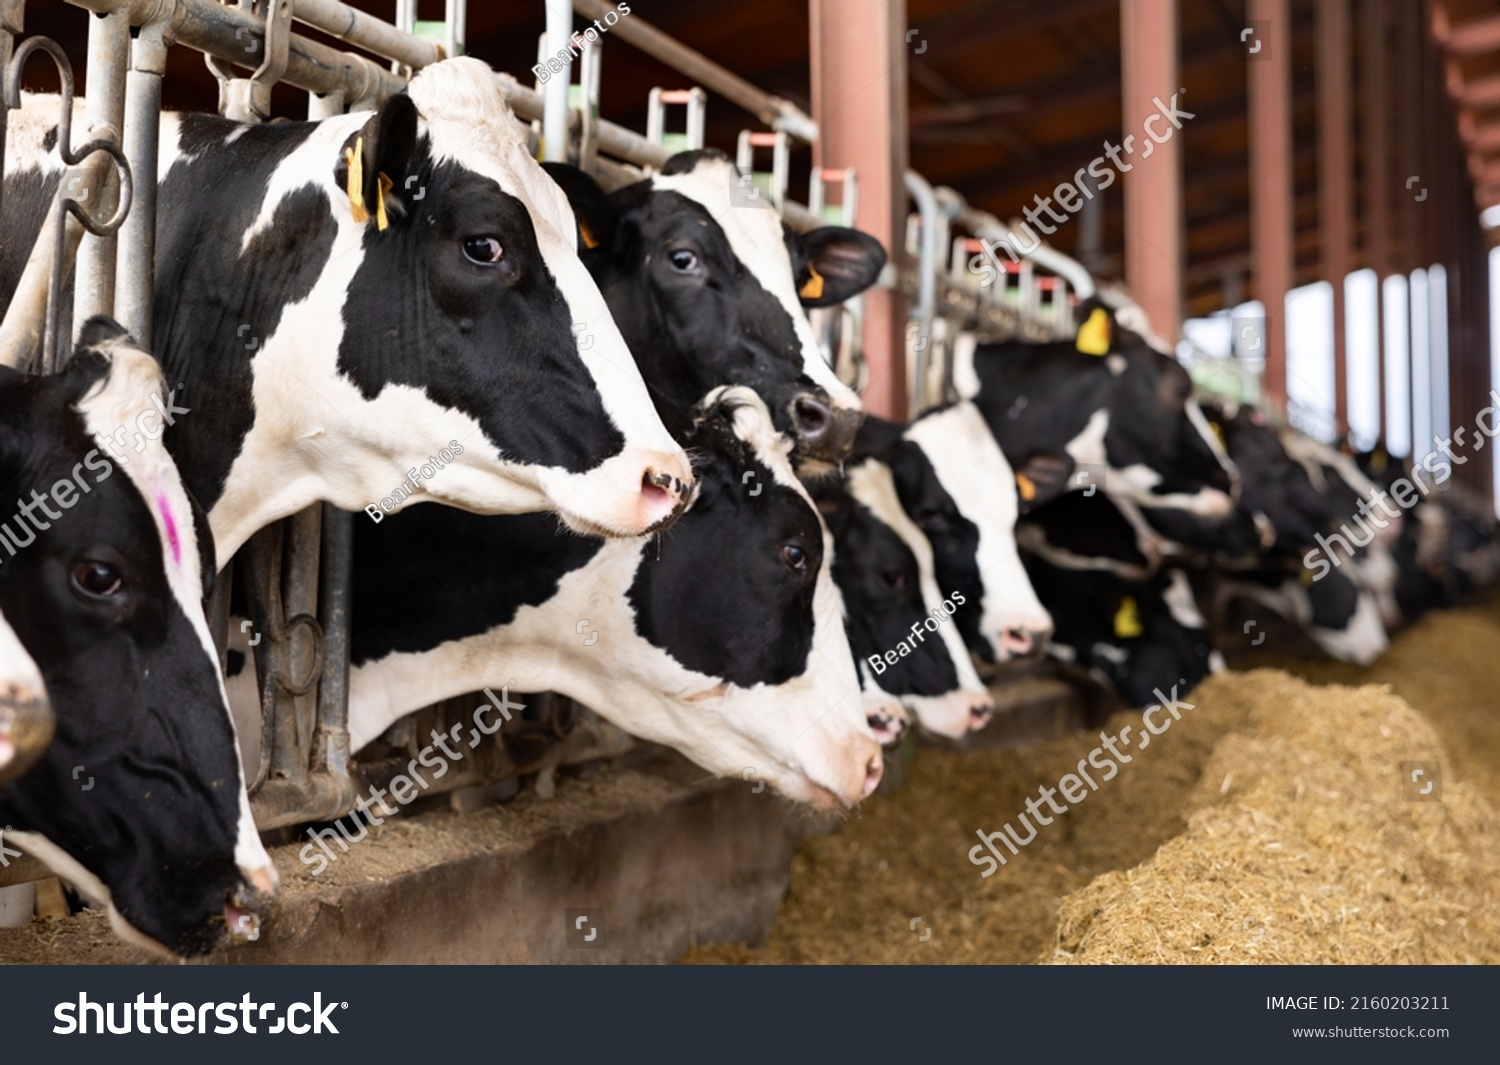 Closeup of black and white Holstein dairy cows eating hay peeking through stall fence on livestock farm.. #2160203211